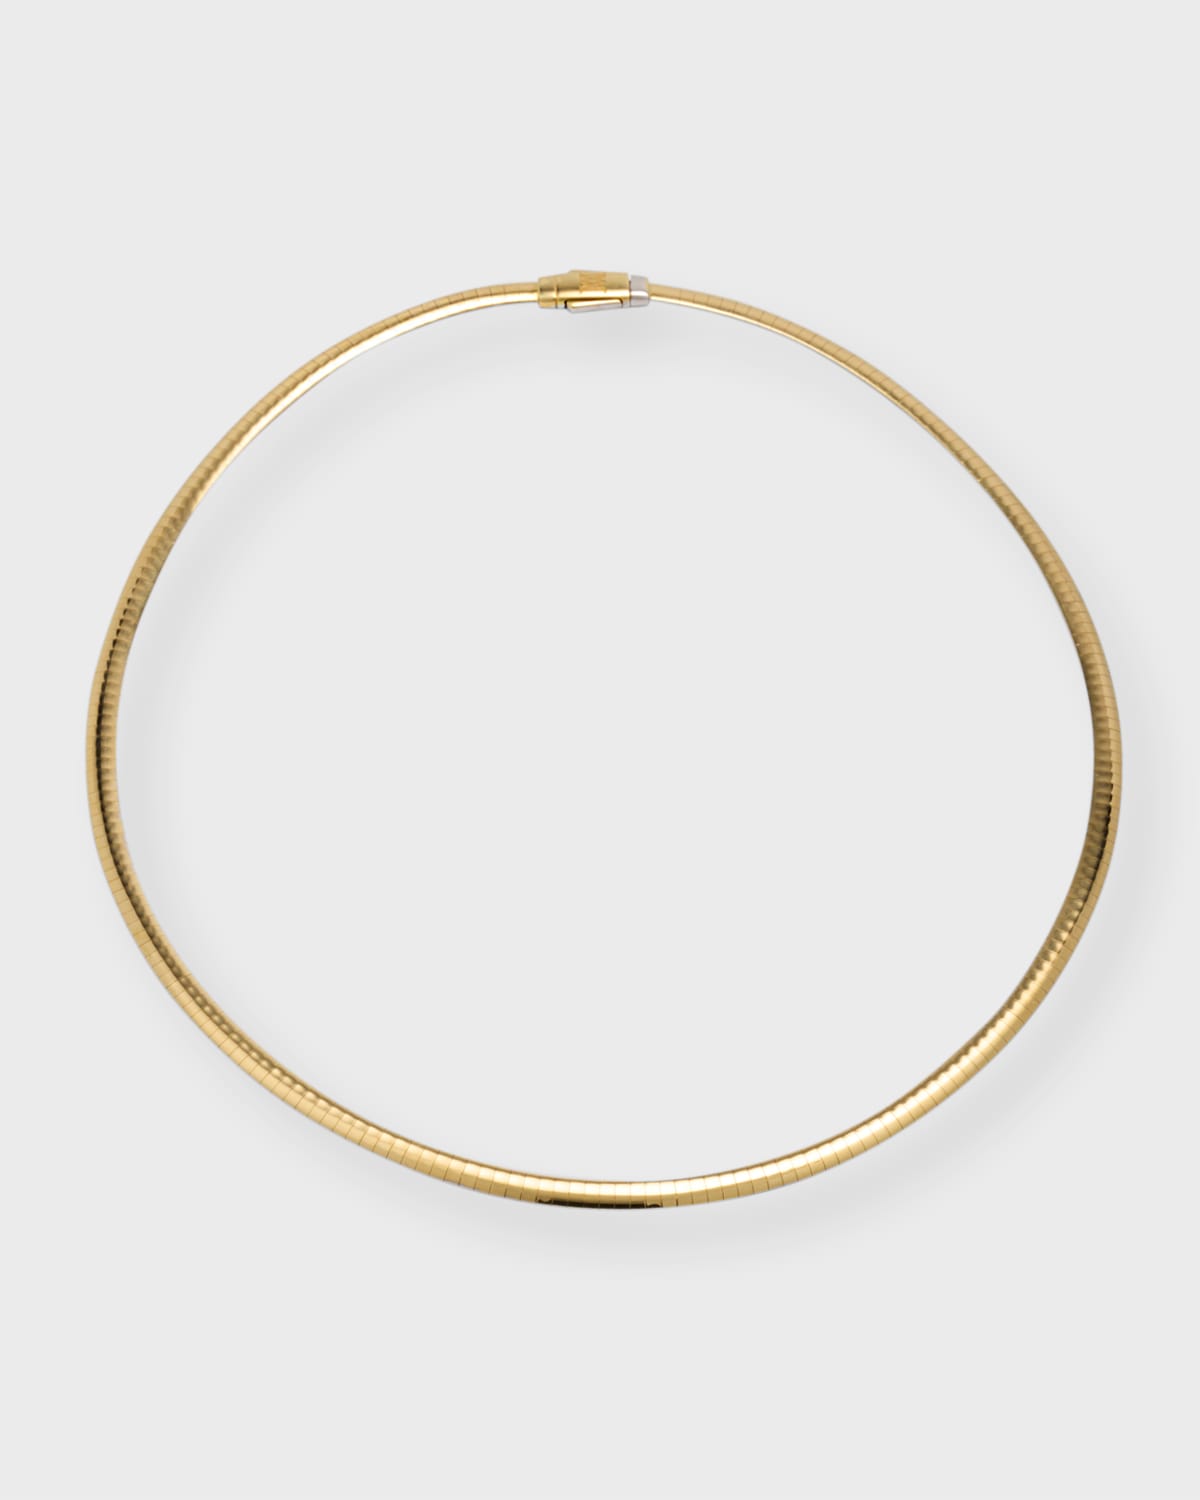 18K Gold Snake Chain Necklace, 4mm, 18"L